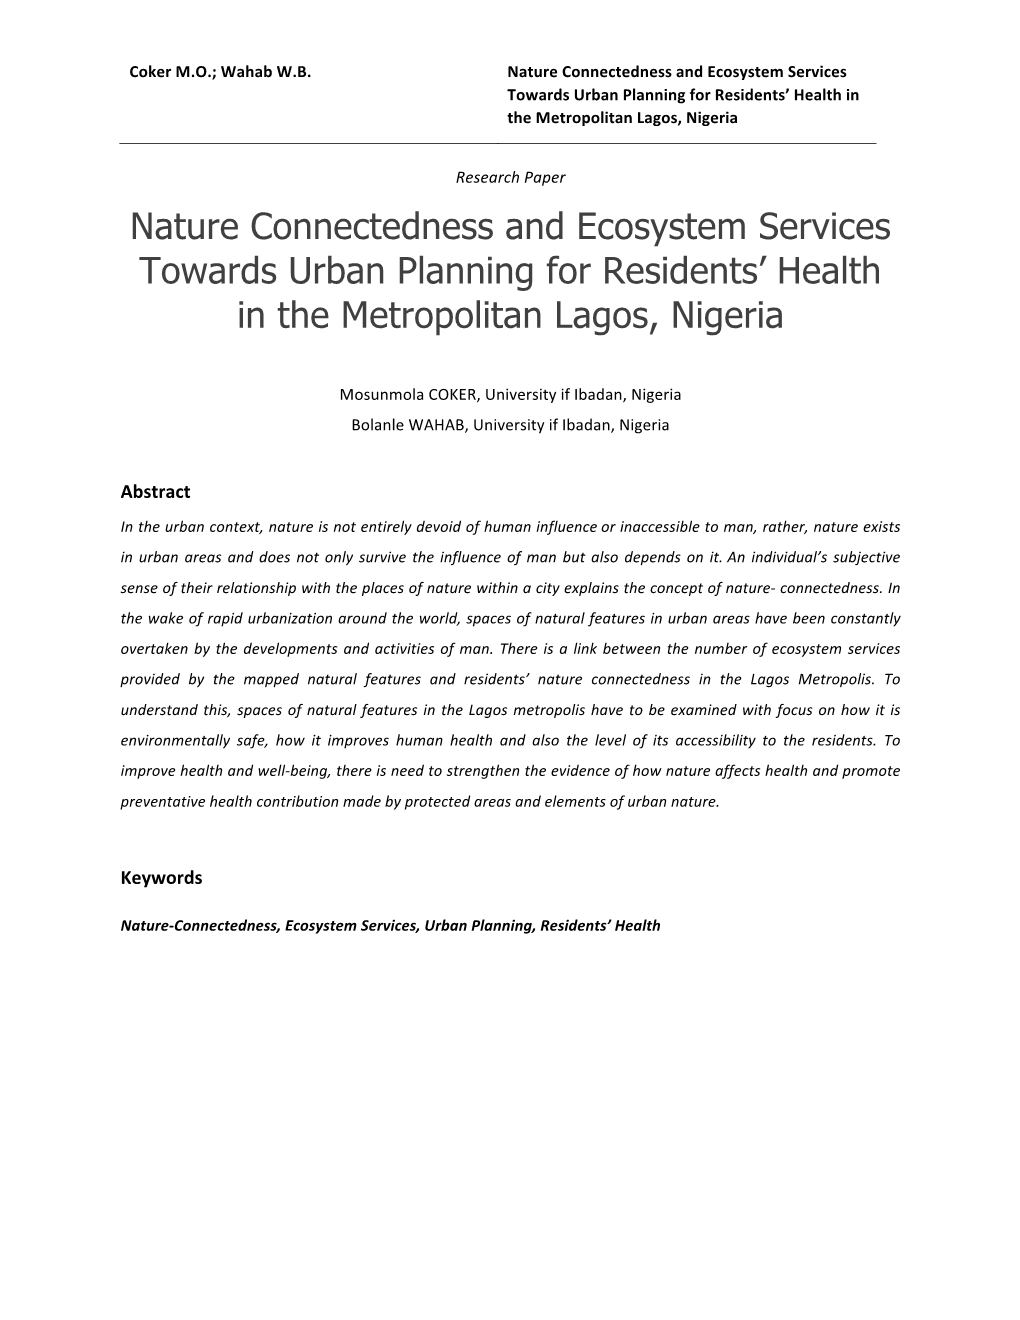 Nature Connectedness and Ecosystem Services Towards Urban Planning for Residents’ Health in the Metropolitan Lagos, Nigeria